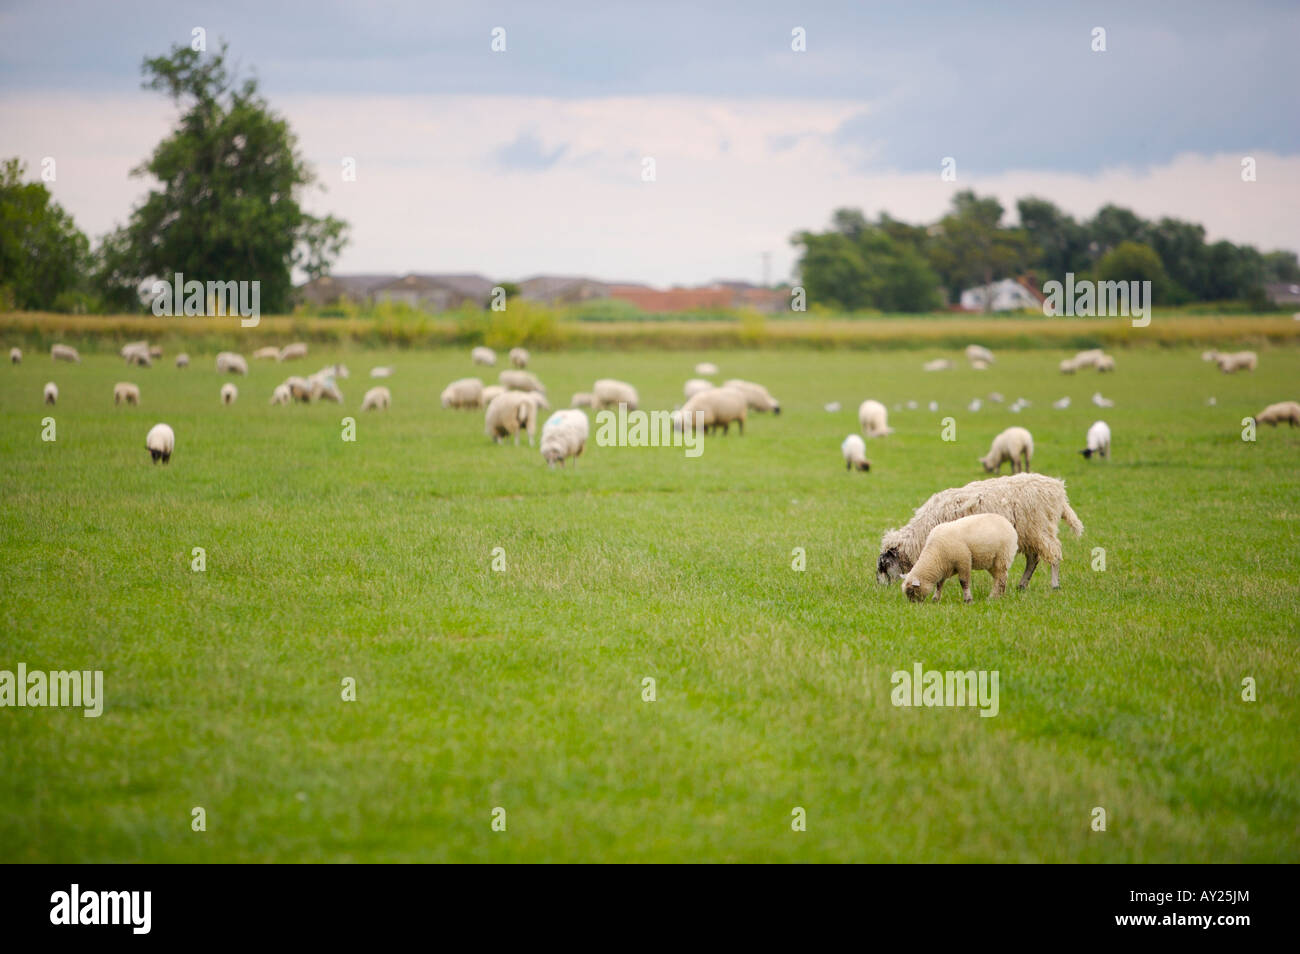 Sheep grazing in a field Stock Photo